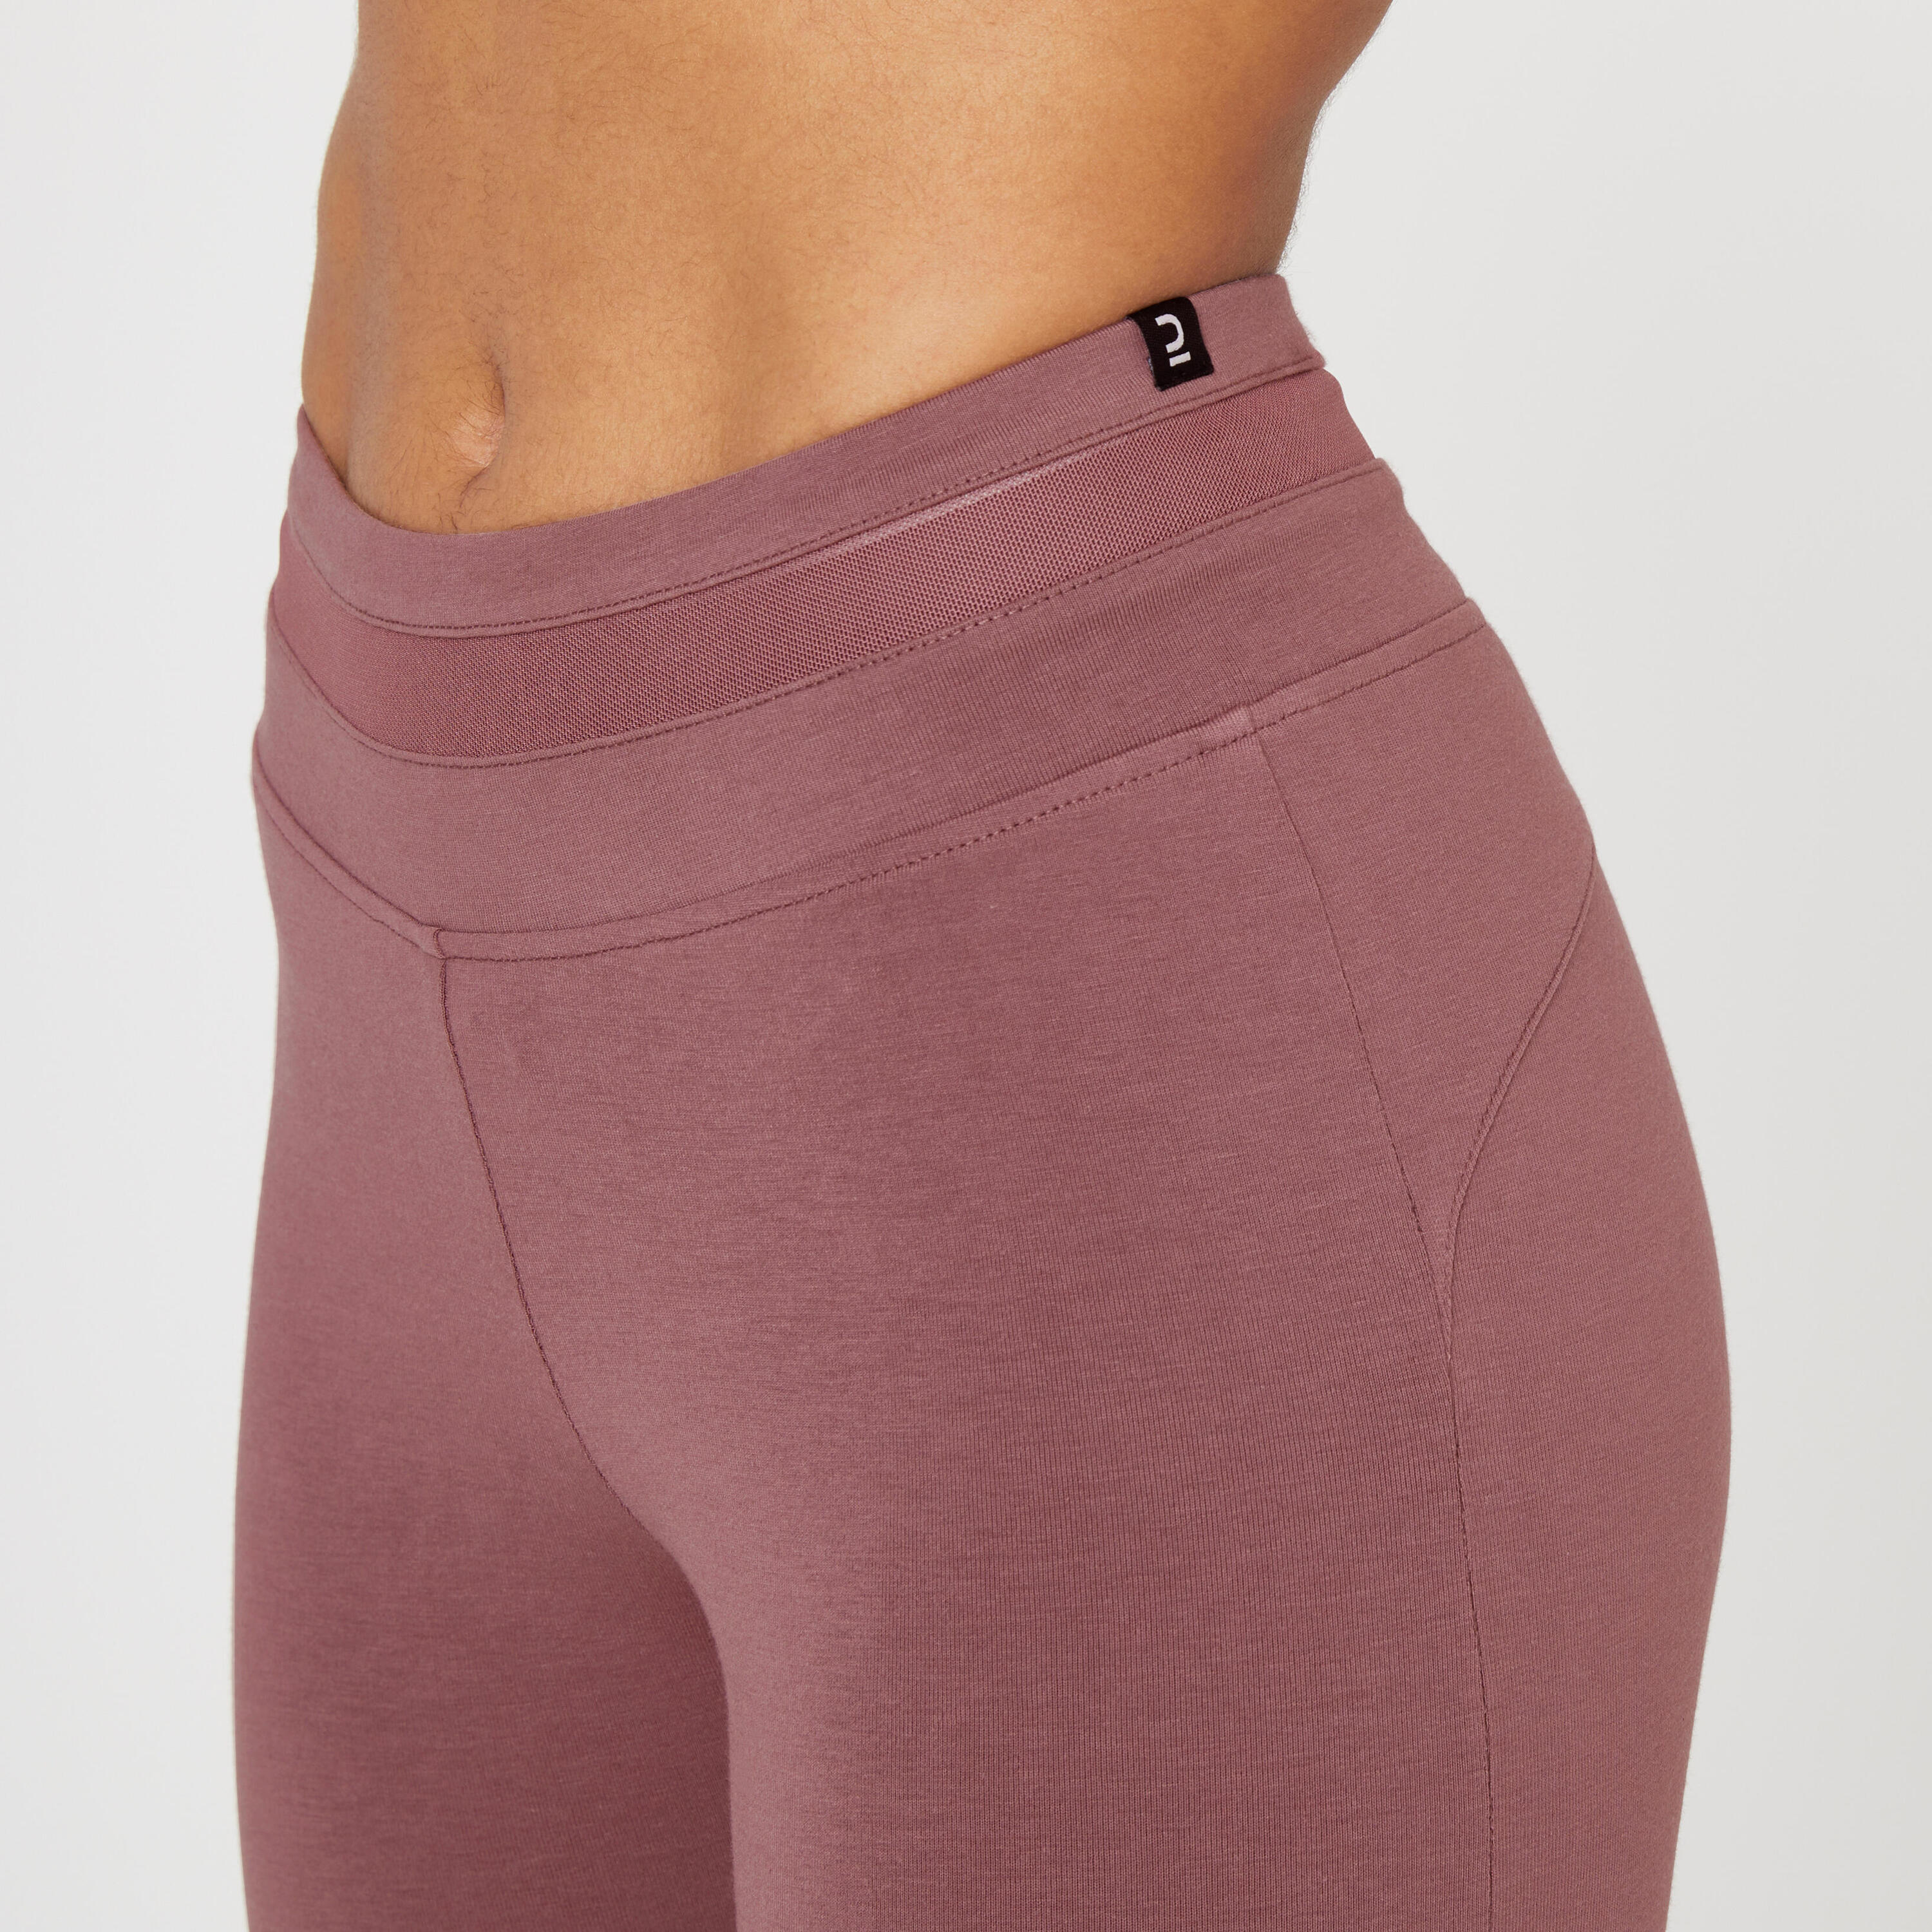 Stretchy High-Waisted Cotton Fitness Leggings with Mesh - Purple 5/7